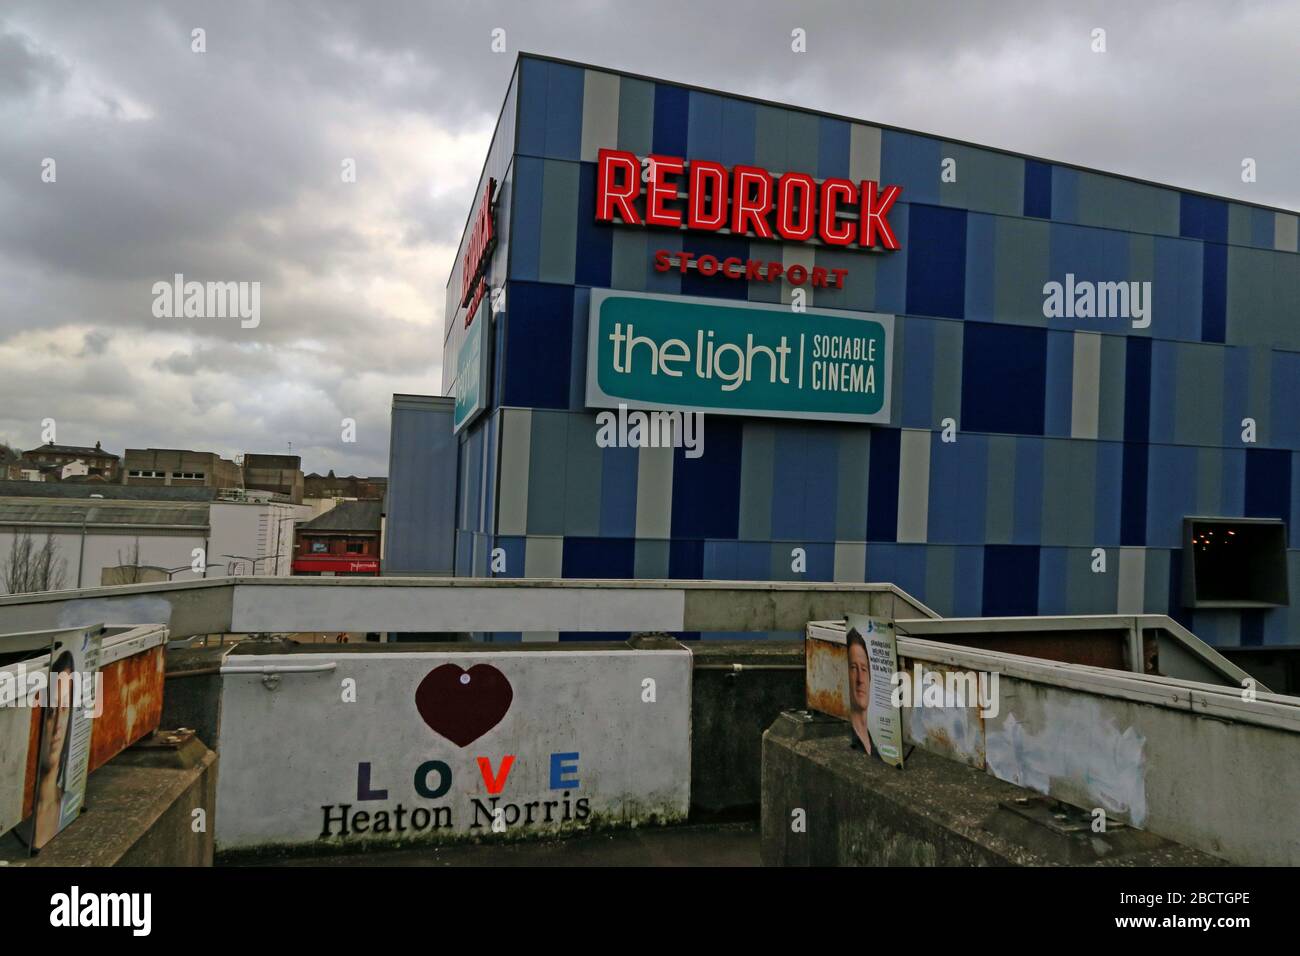 Redrock, TheLight, unité 10, Bridgefield St, Stockport, Greater Manchester, Cheshire, Angleterre, Royaume-Uni, SK1 1 sa Banque D'Images